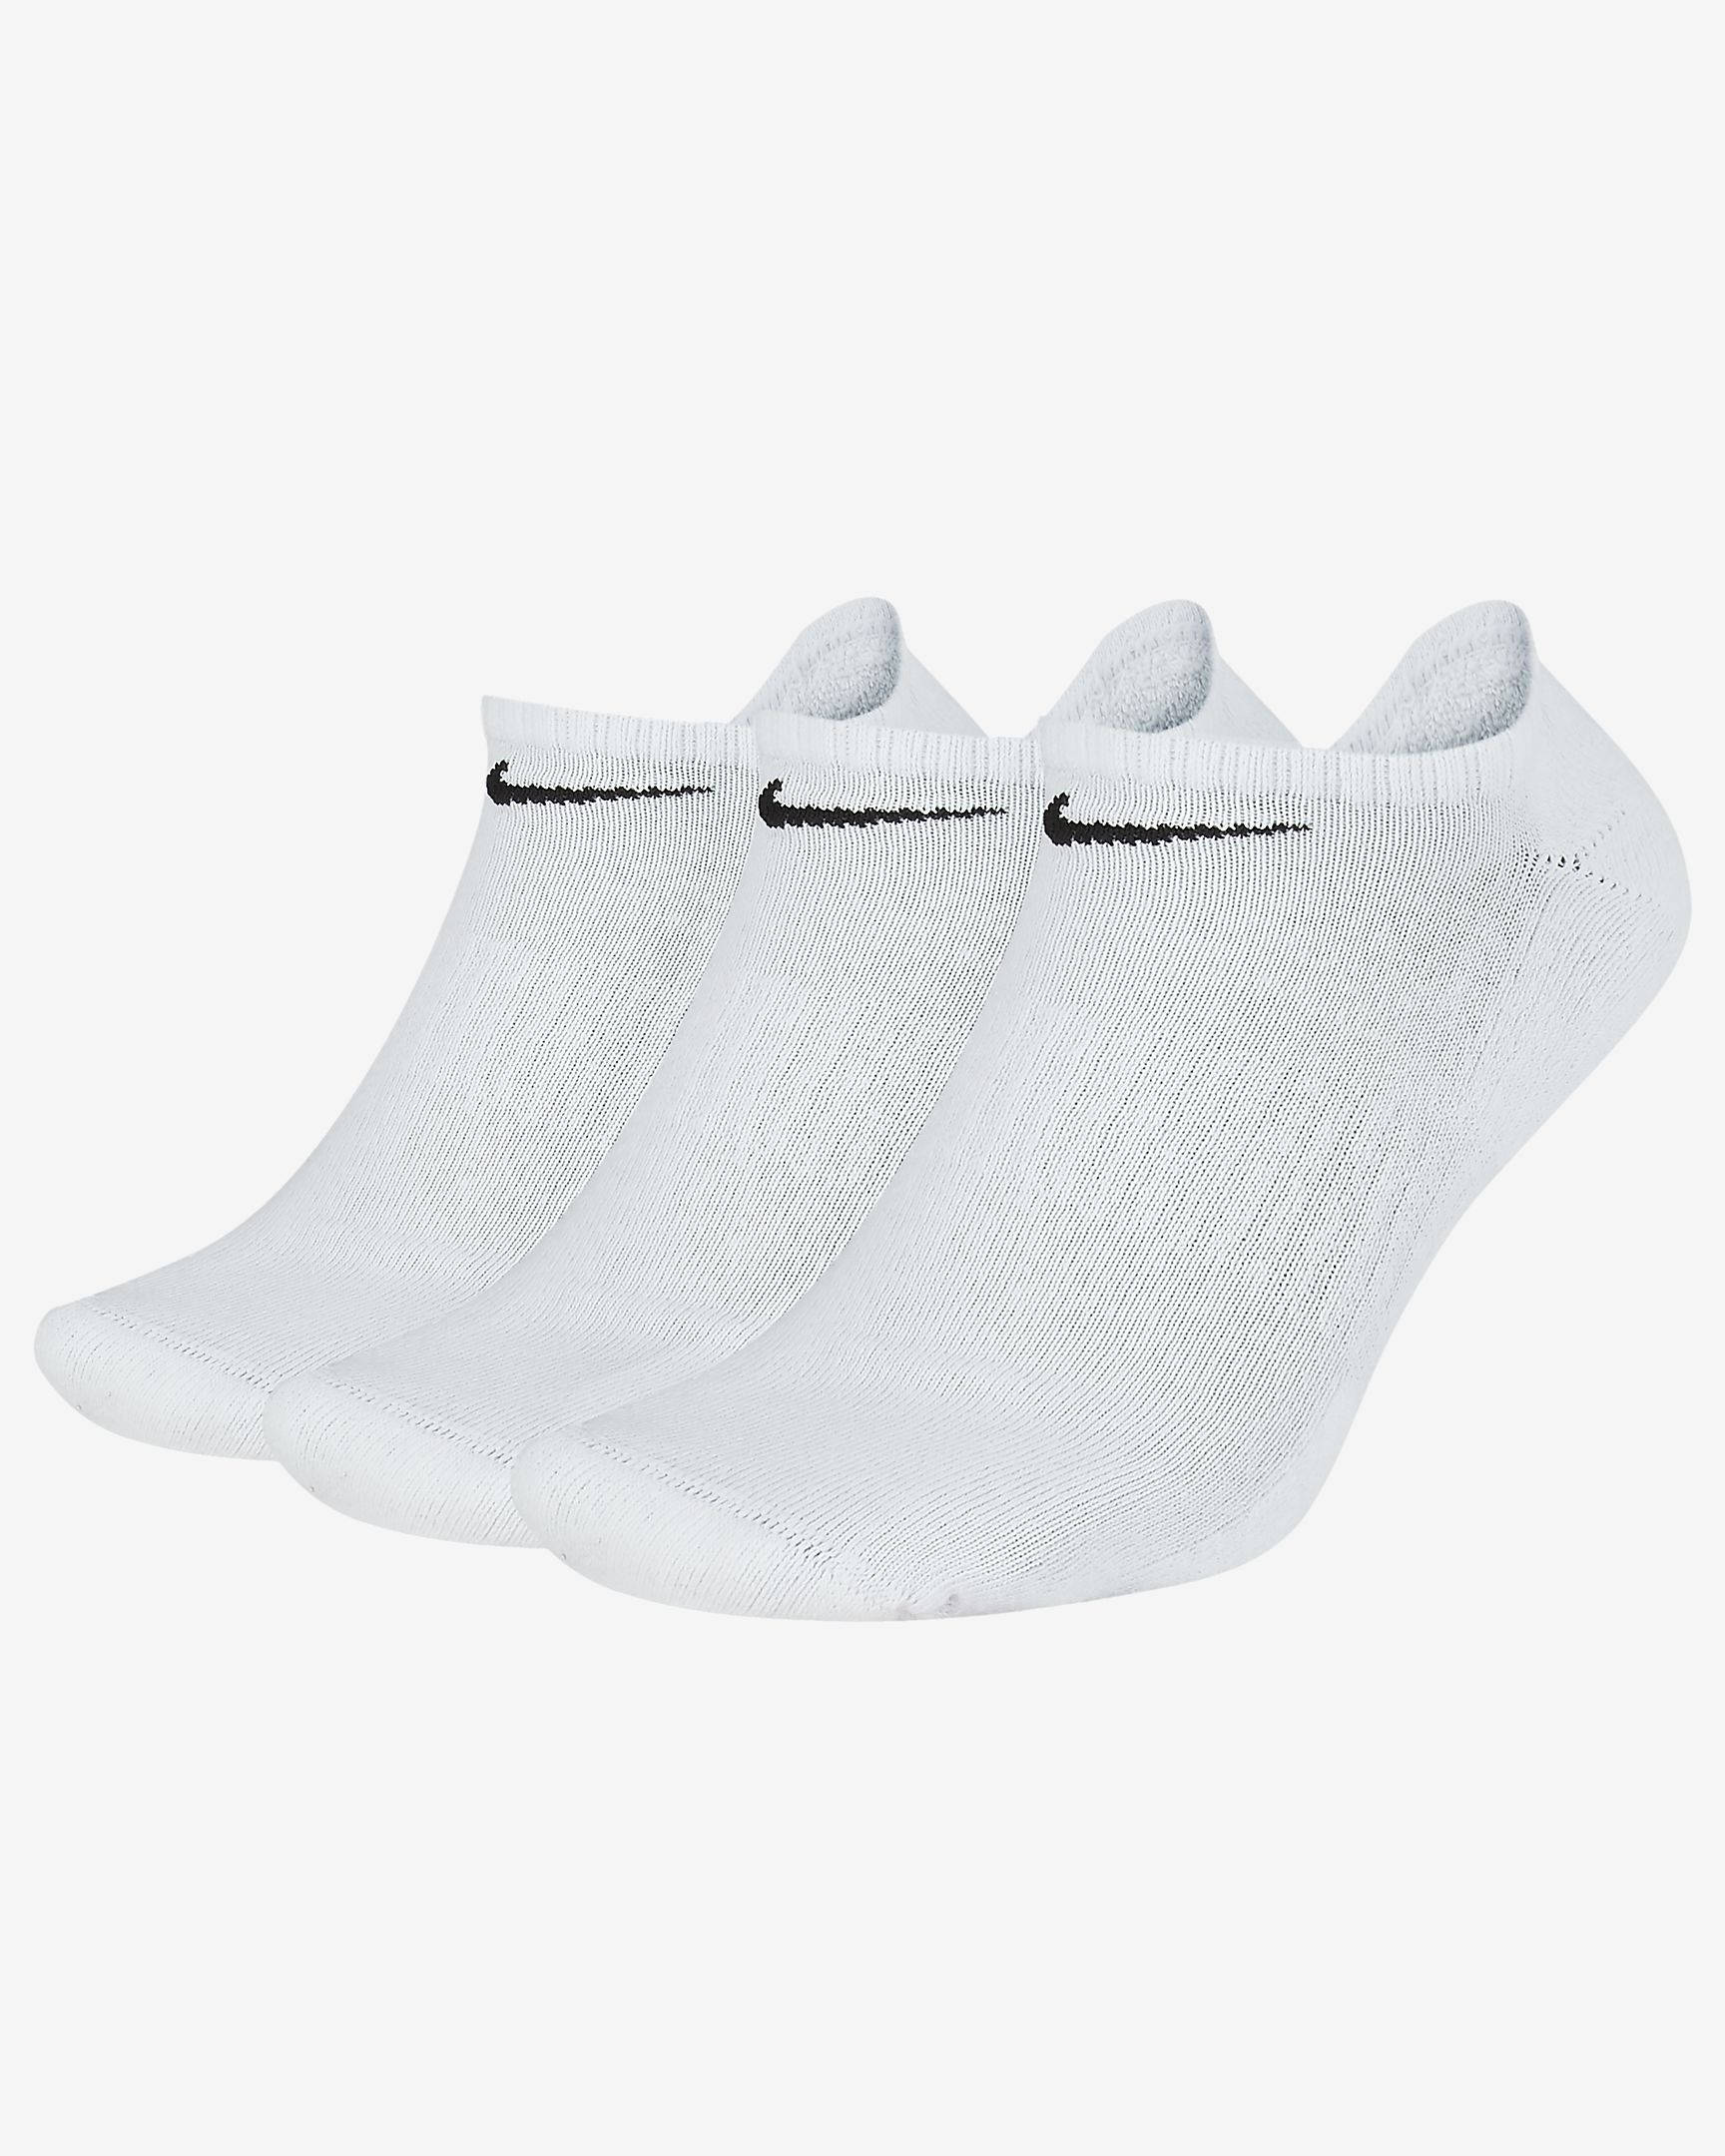 Nike Everyday Cushioned Training No-Show Socks - White | The Sole Supplier